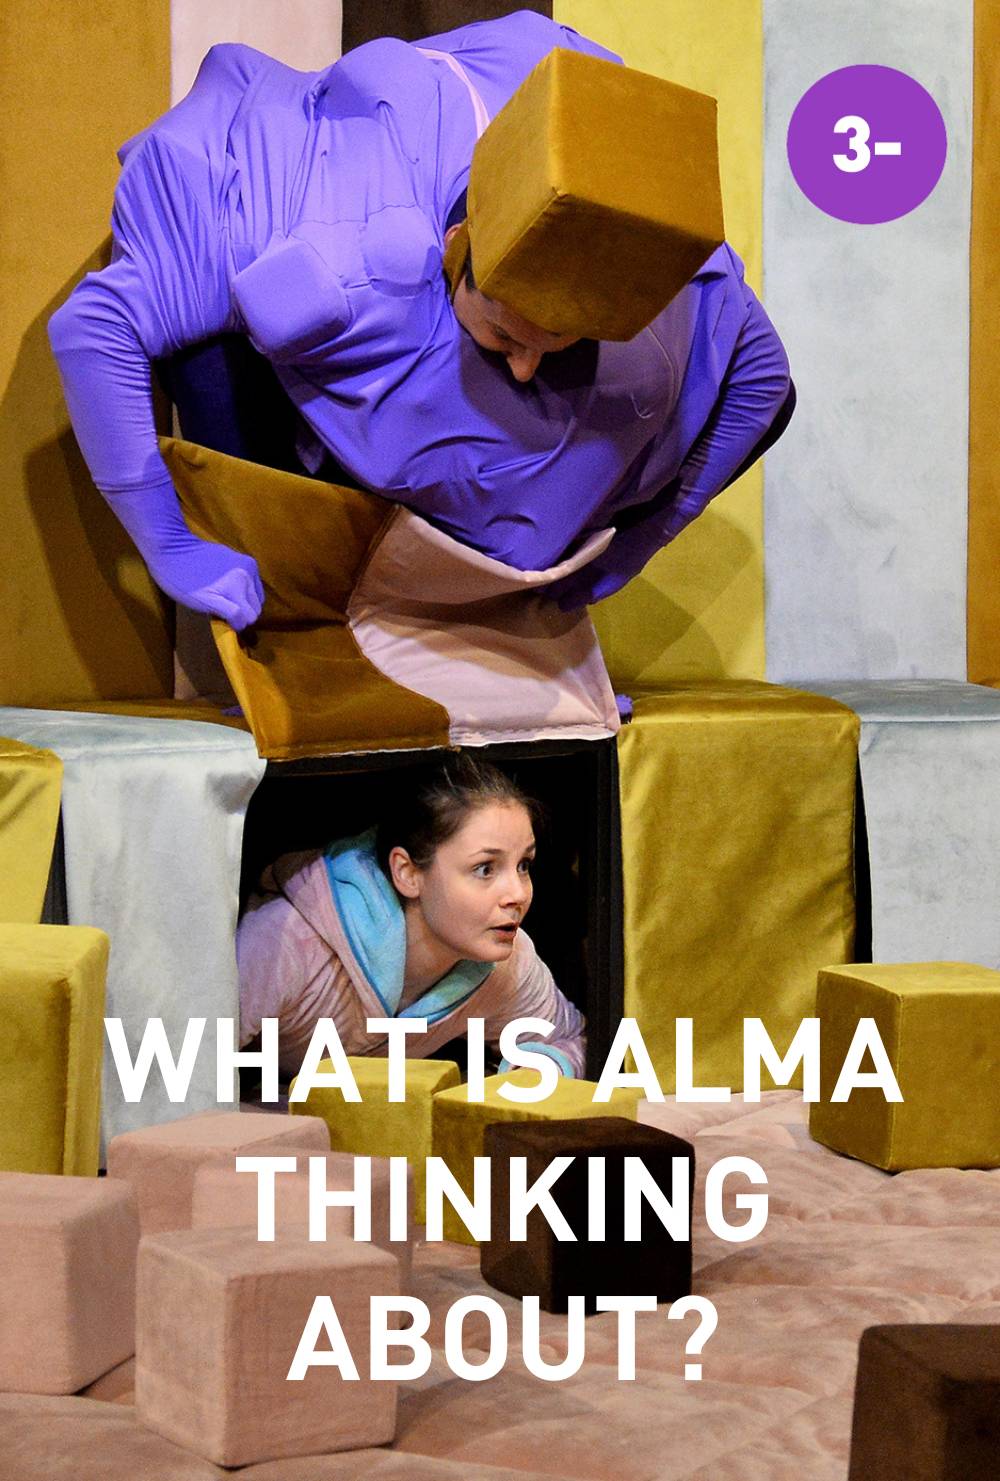 What is Alma thinking about?